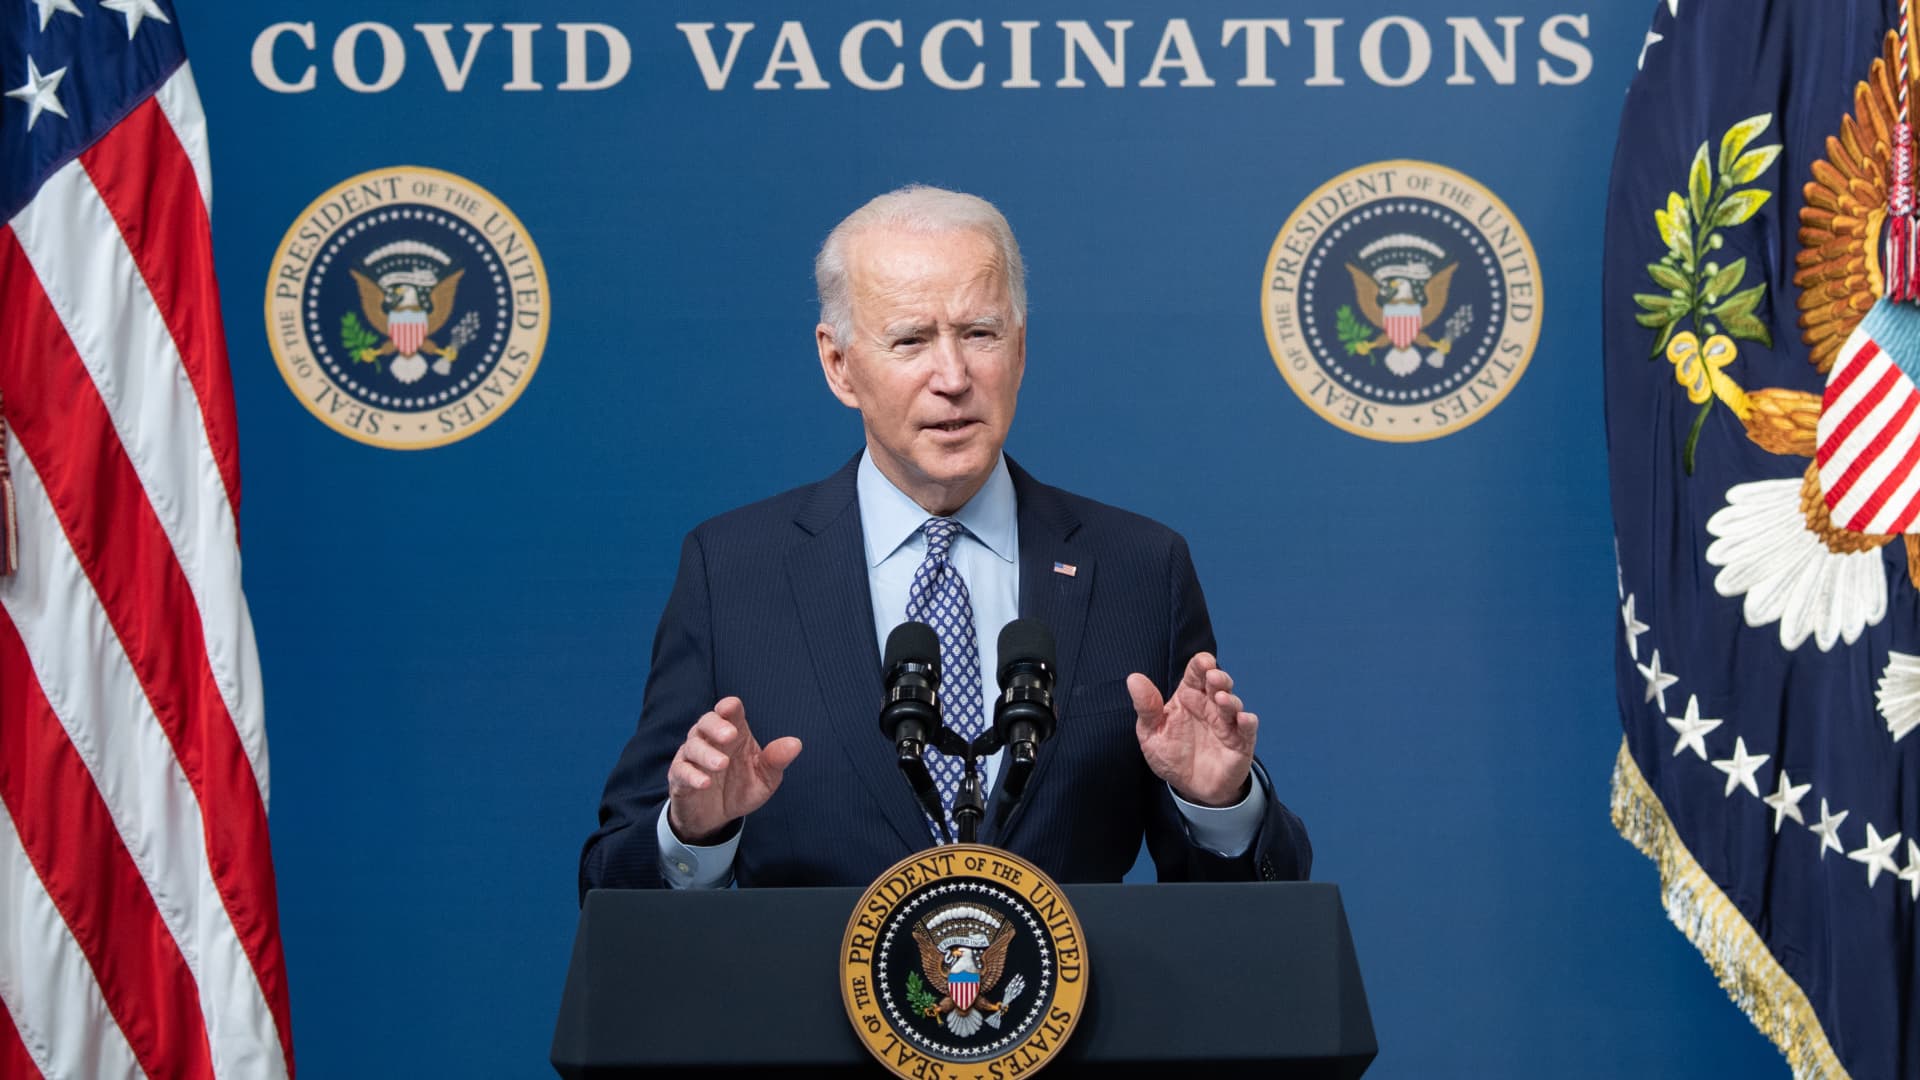 US President Joe Biden speaks about the 50 million doses of the Covid-19 vaccine shot administered in the US during an event commemorating the milestone in the Eisenhower Executive Office Building in Washington, DC, February 25, 2021.